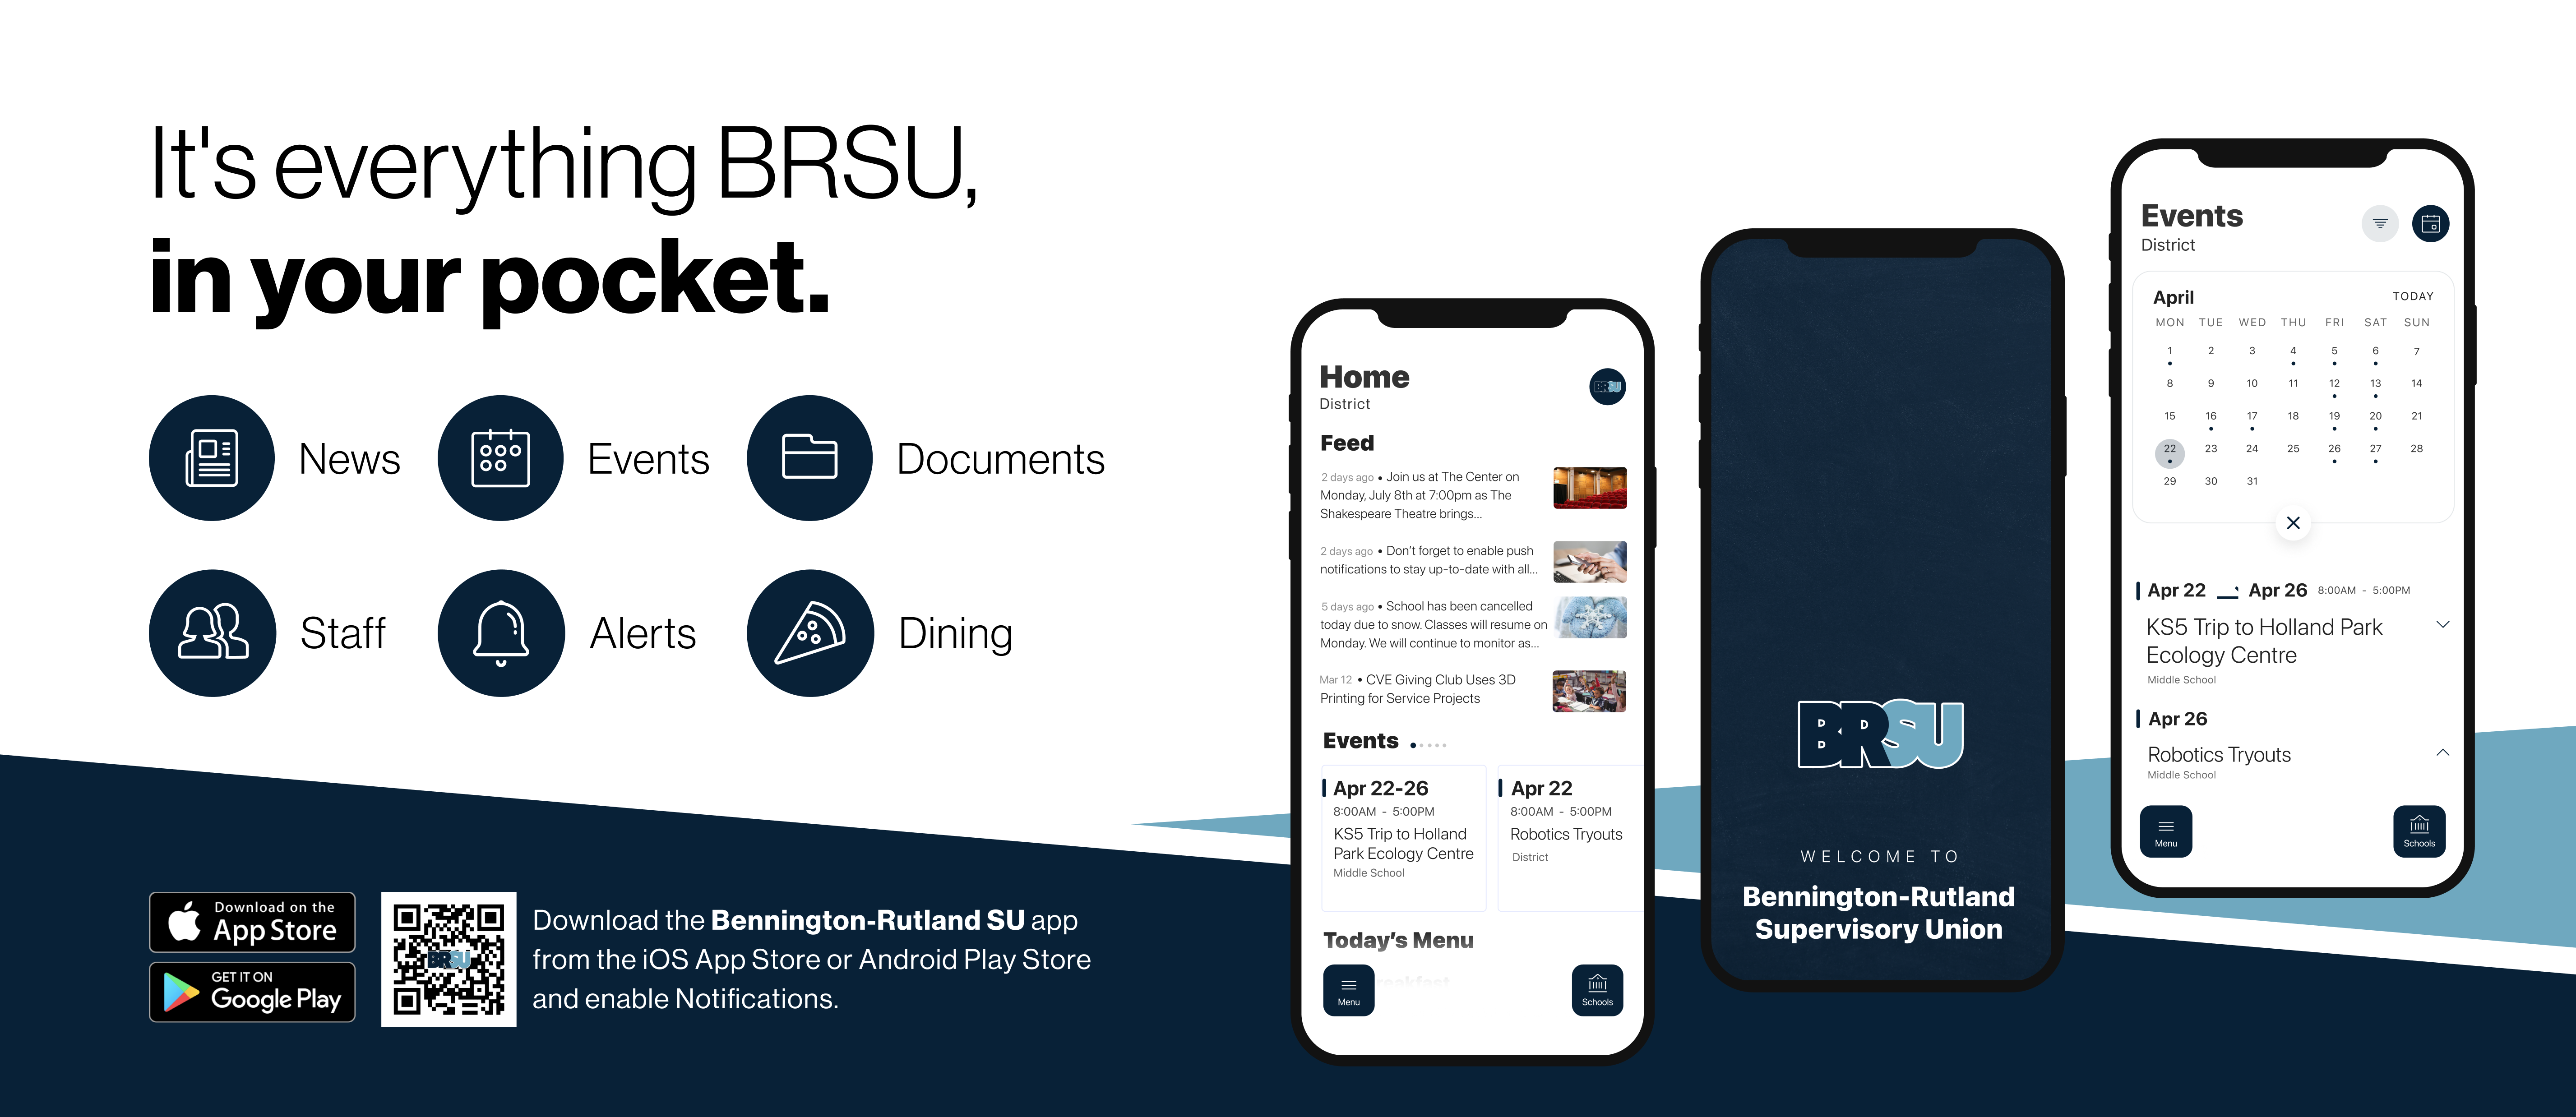 It's everything BRSU, in your pocket.